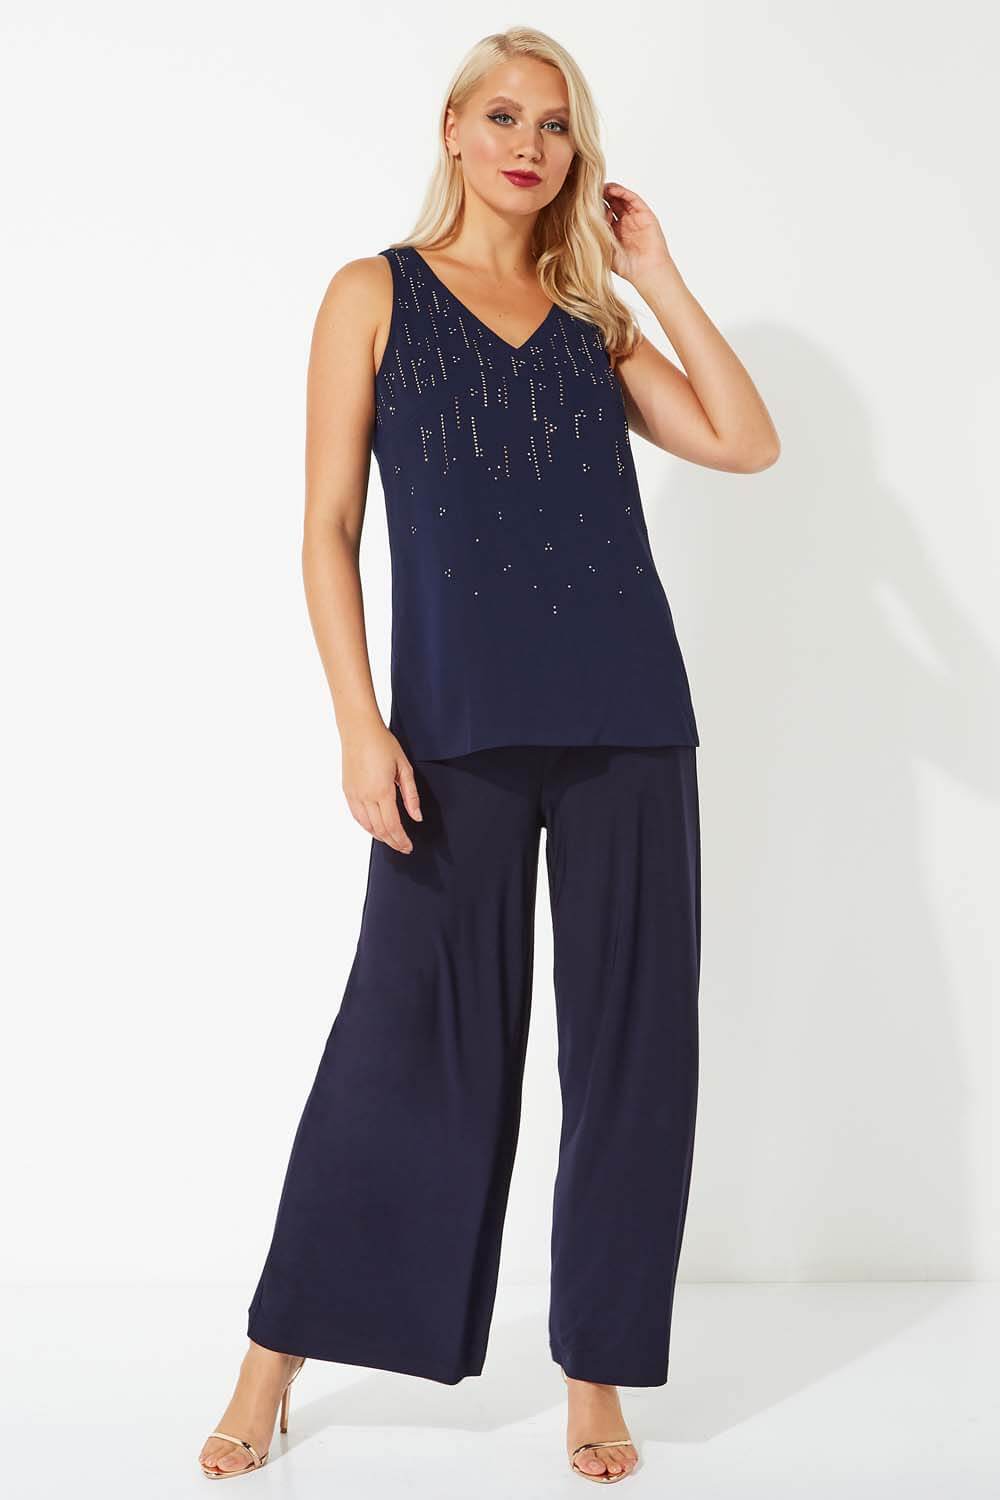 Sparkle Detail Cami Top and Jacket in Midnight Blue - Roman Originals UK